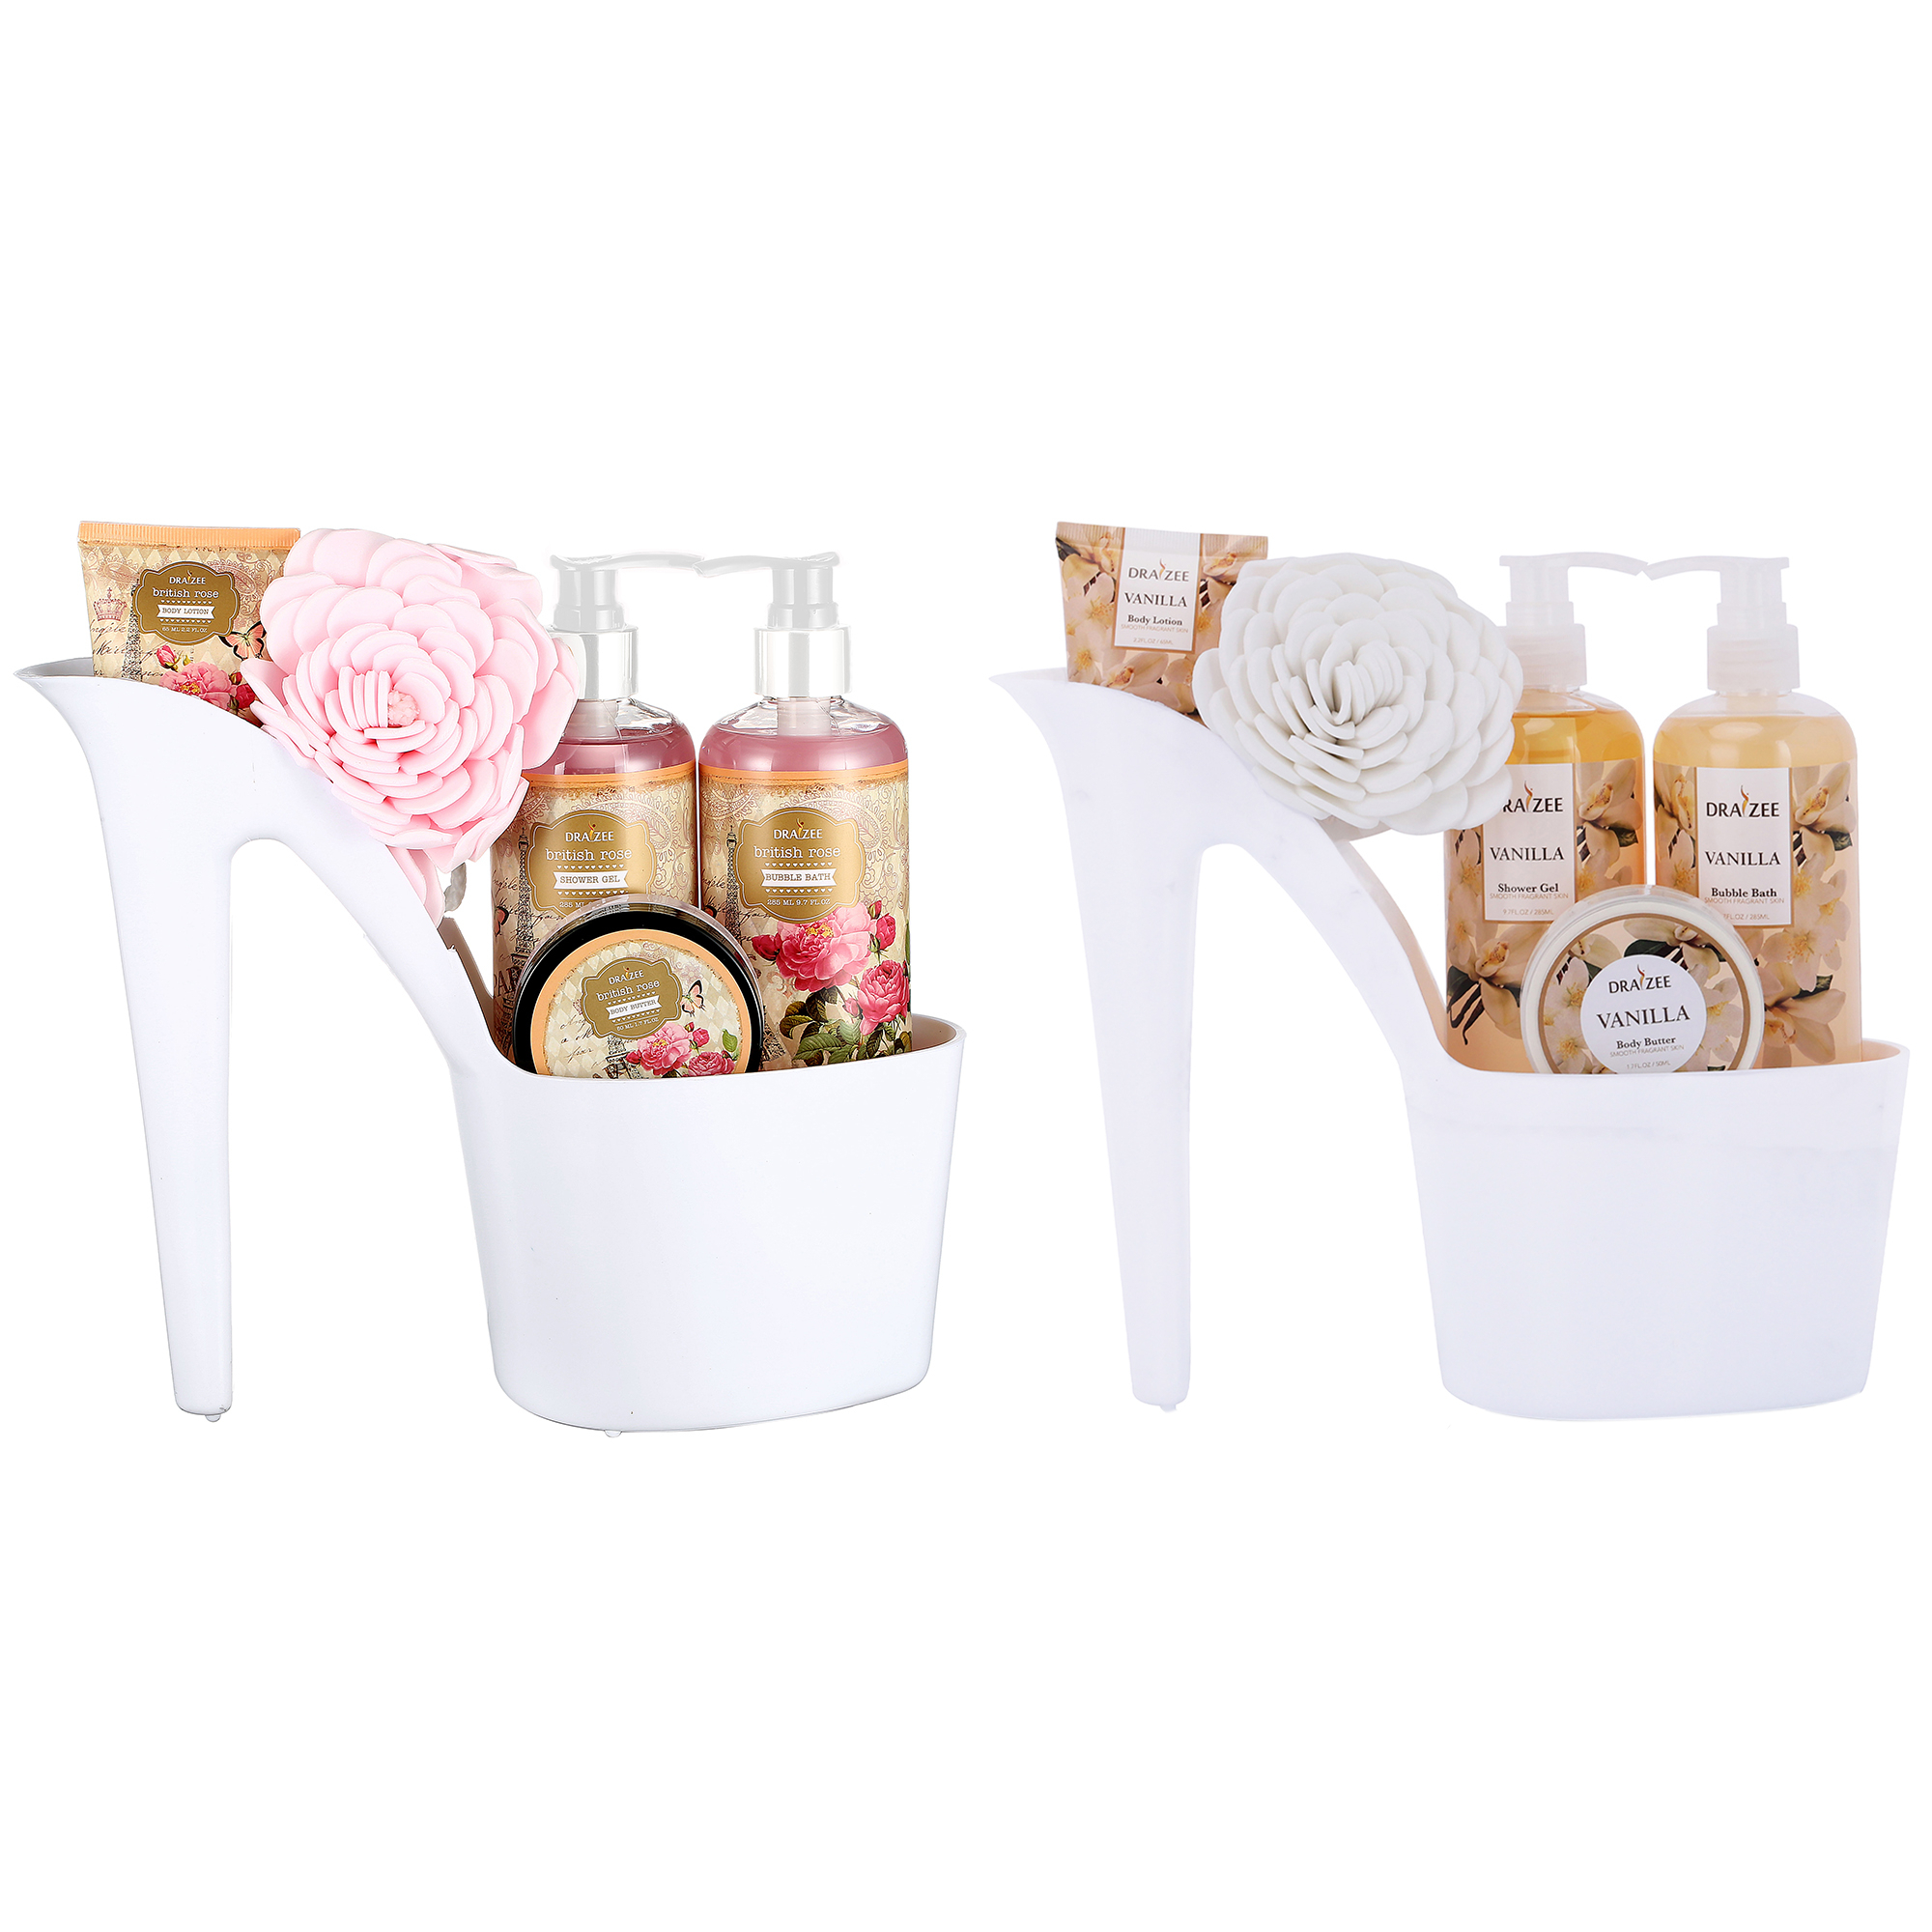 Set Of 2 Draizee 10 Pcs Scented Spa Gift Basket Rose, Vanilla With Shower Gel, Bubble Bath, Body Butter & Lotion, Soft Bath Puff